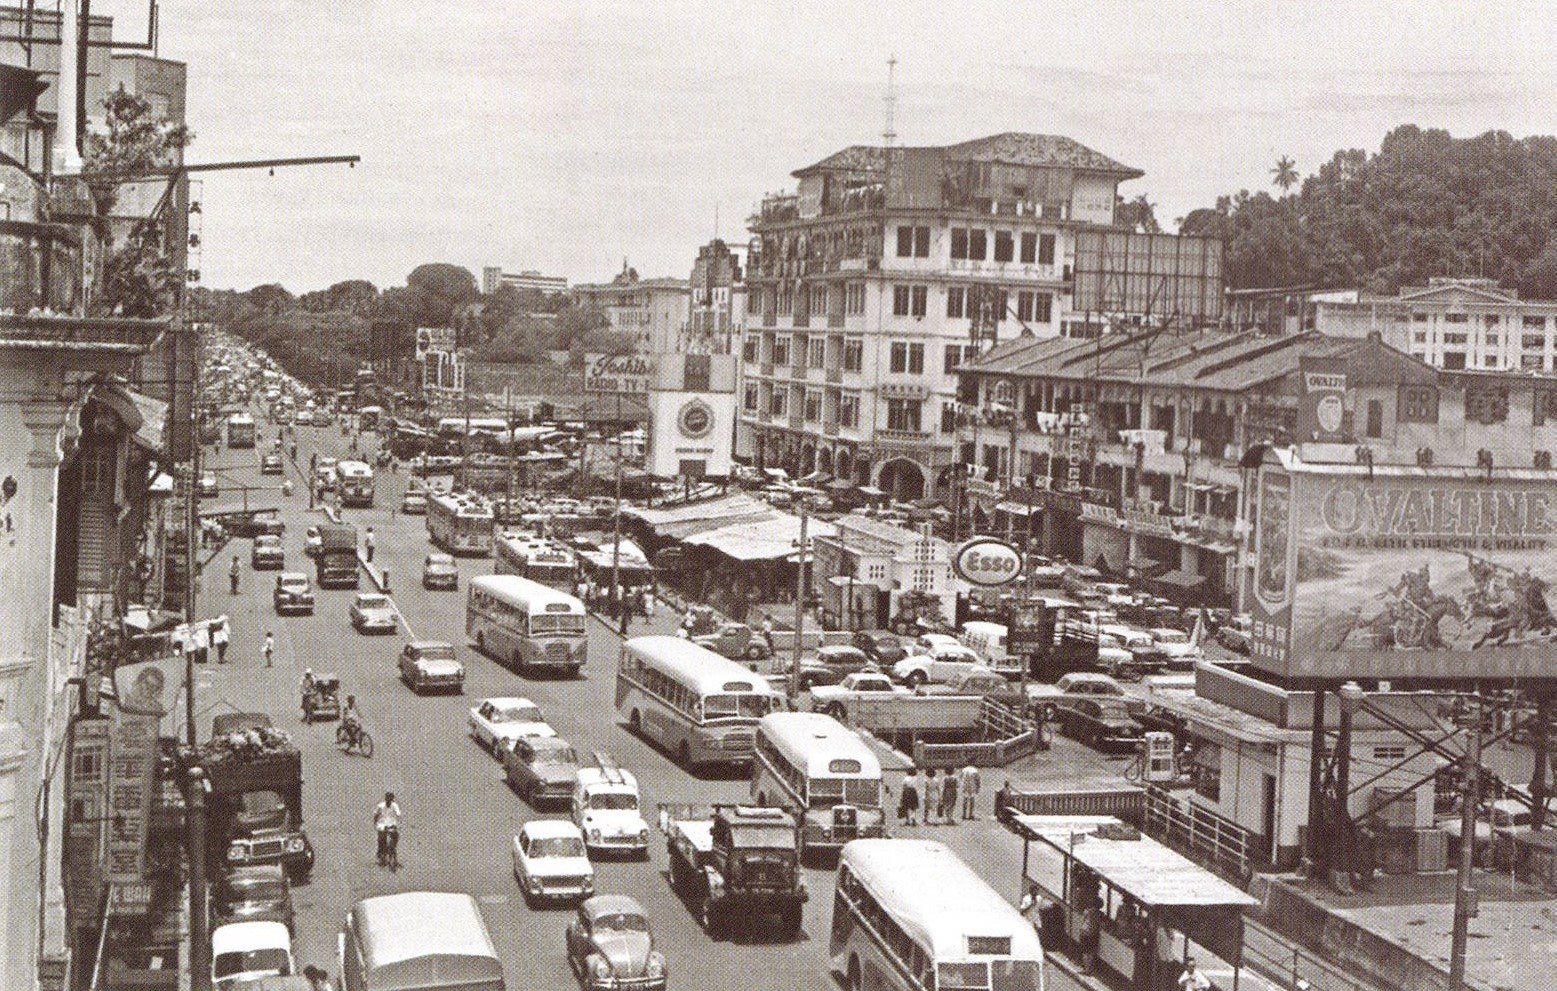 1960 circa. Unlicensed roadside stalls along New Bridge Road in front of Majestic Theatre and Nam Tin Hotel which spilled over from People’s Park Market. Source: Ray Tyres